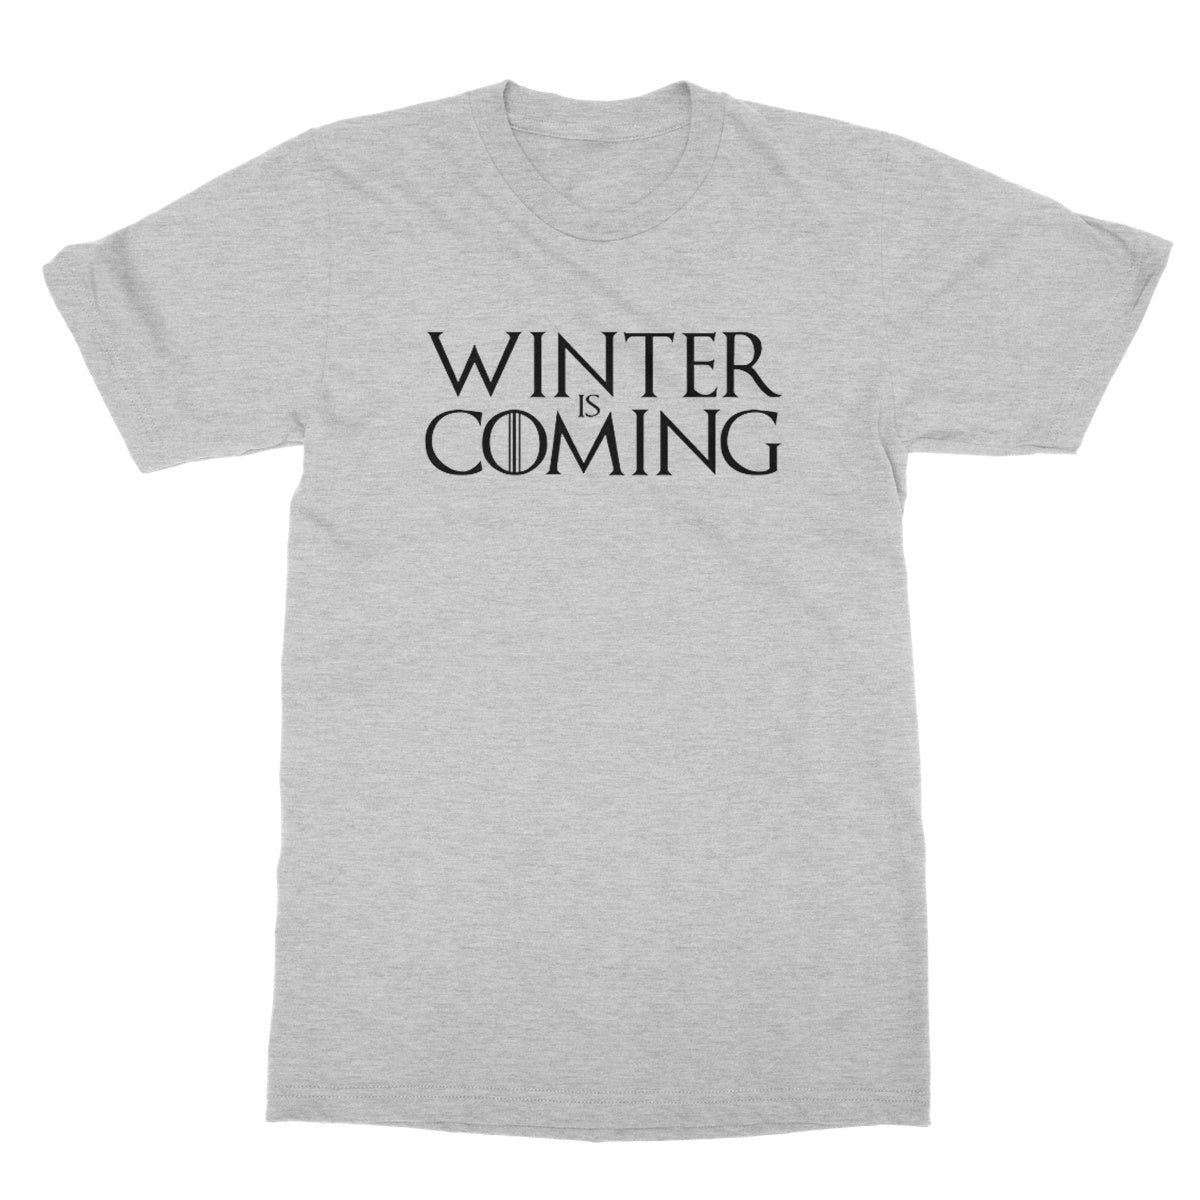 winter is coming t shirt grey